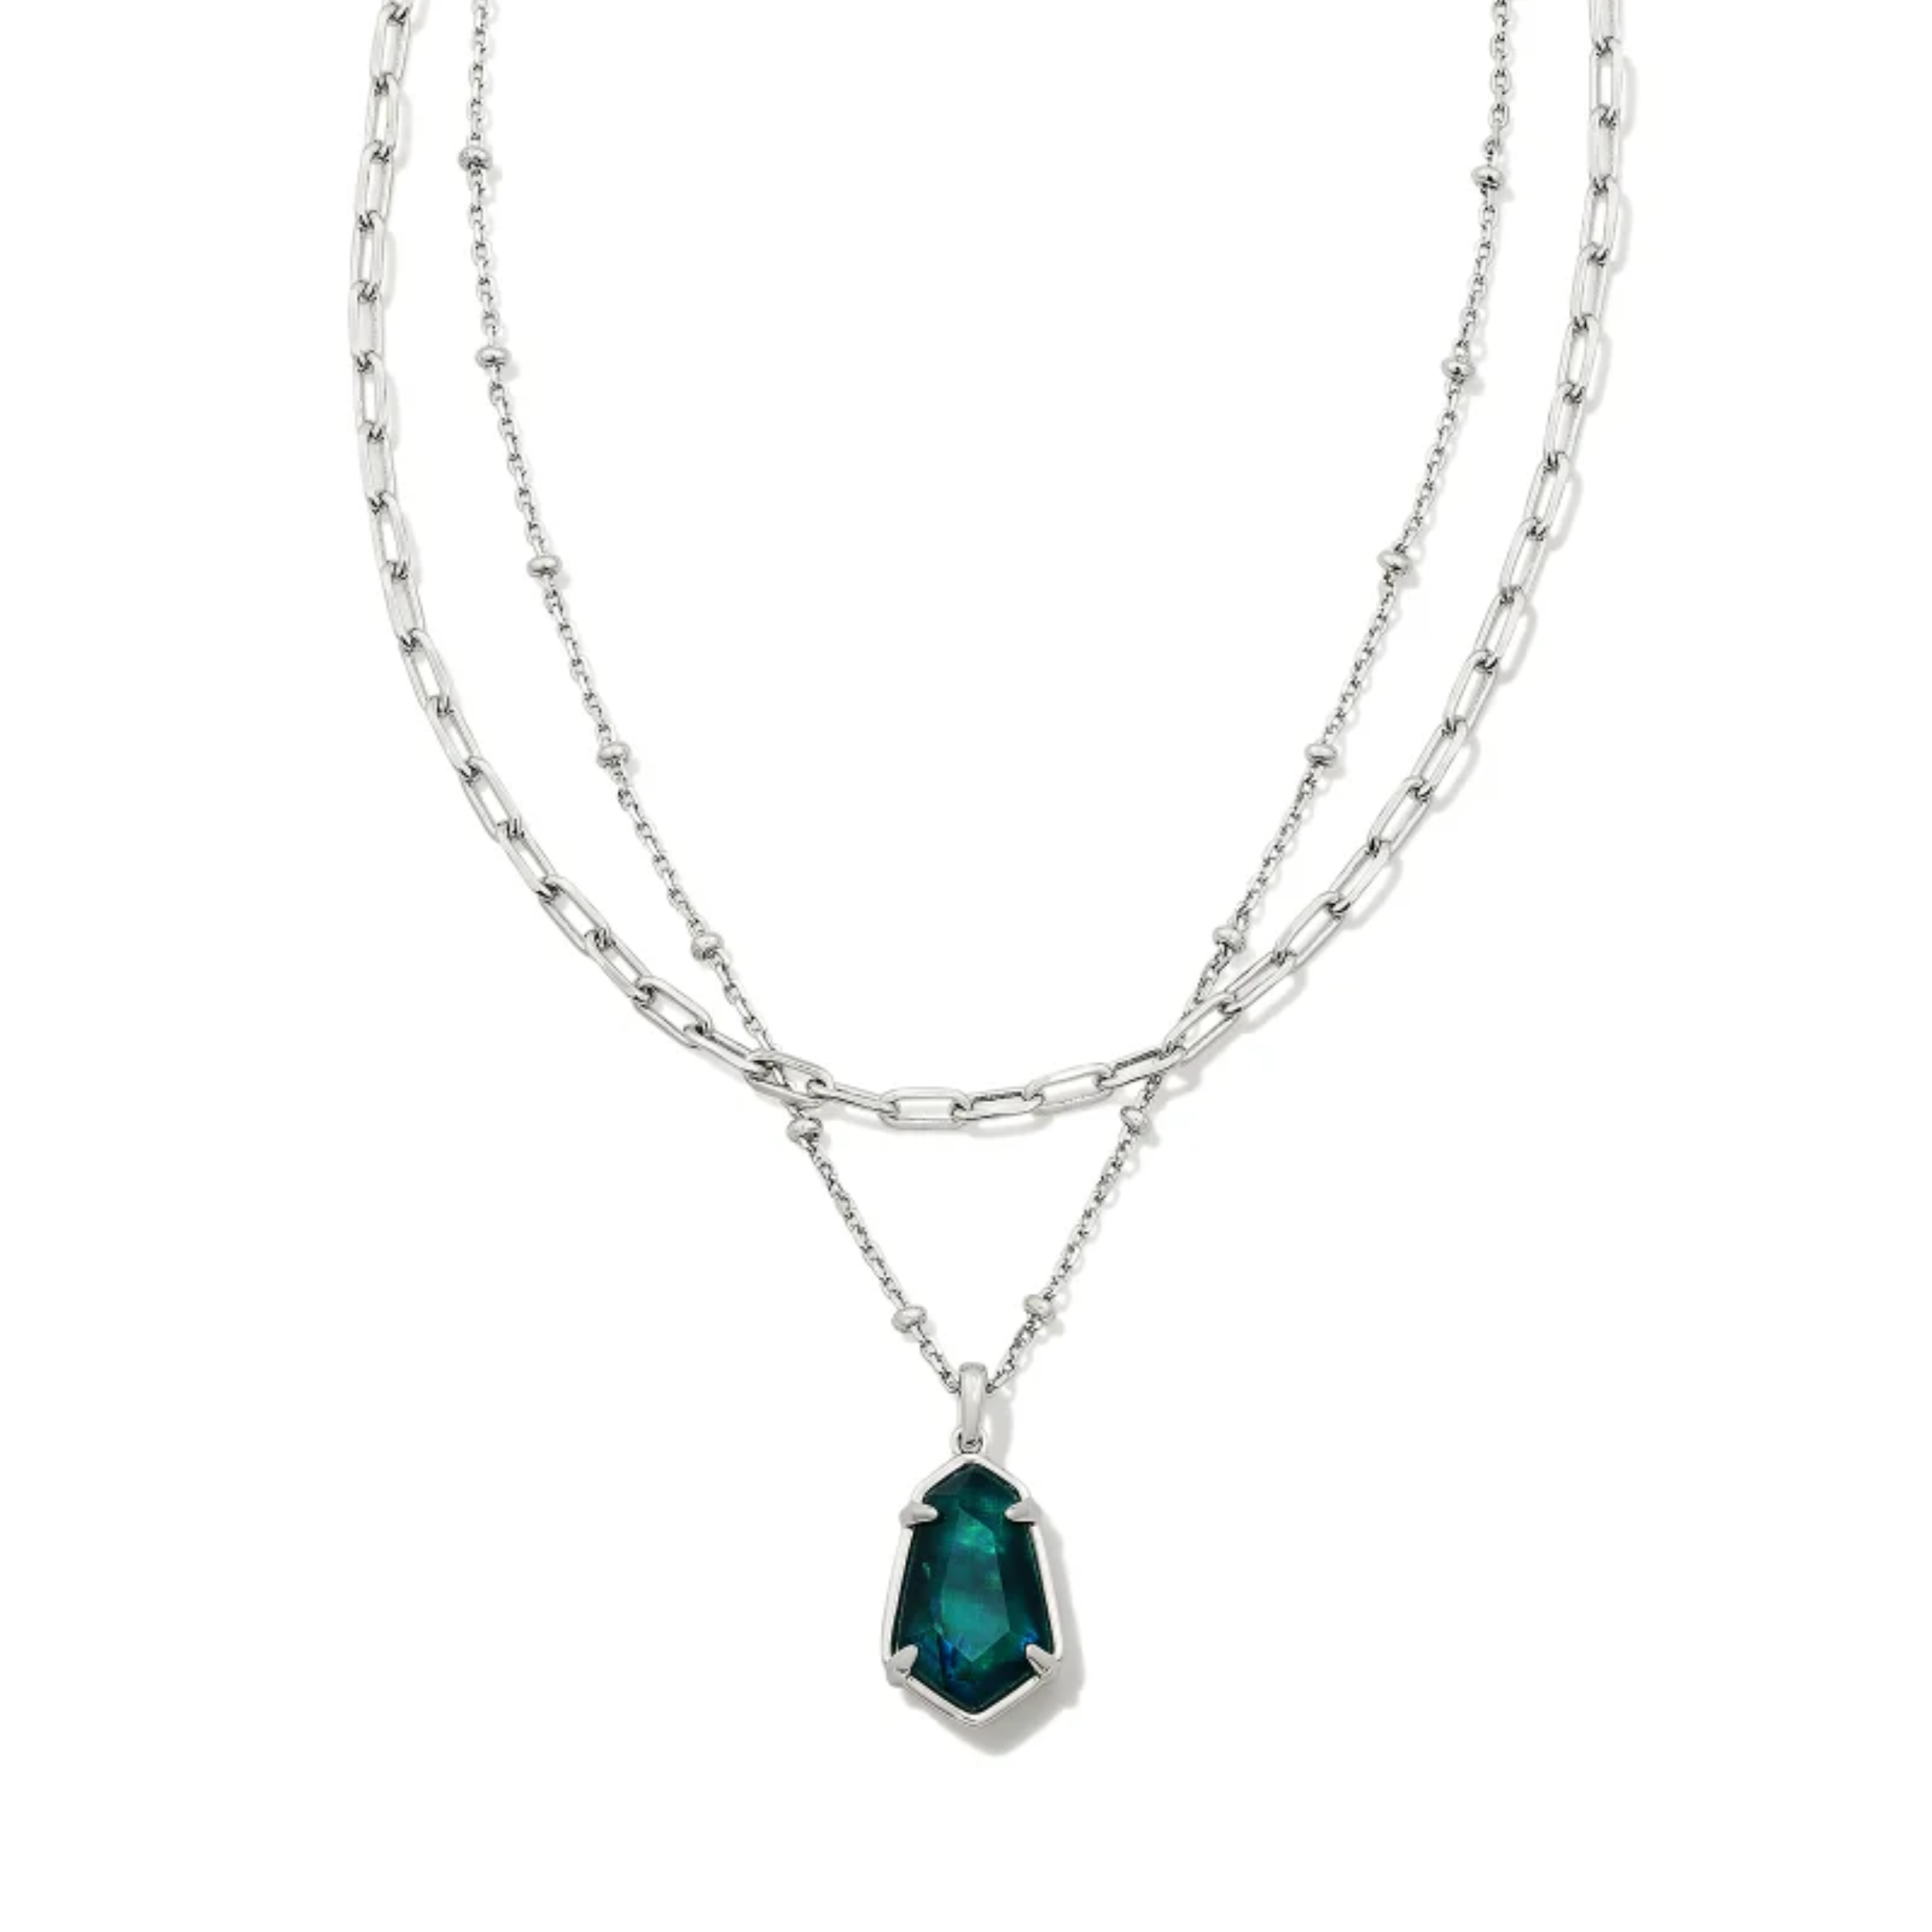 This Multi Strand Alexandria Necklace in Silver Teal Green Illusion by kendra Scott is pictured with a white background.